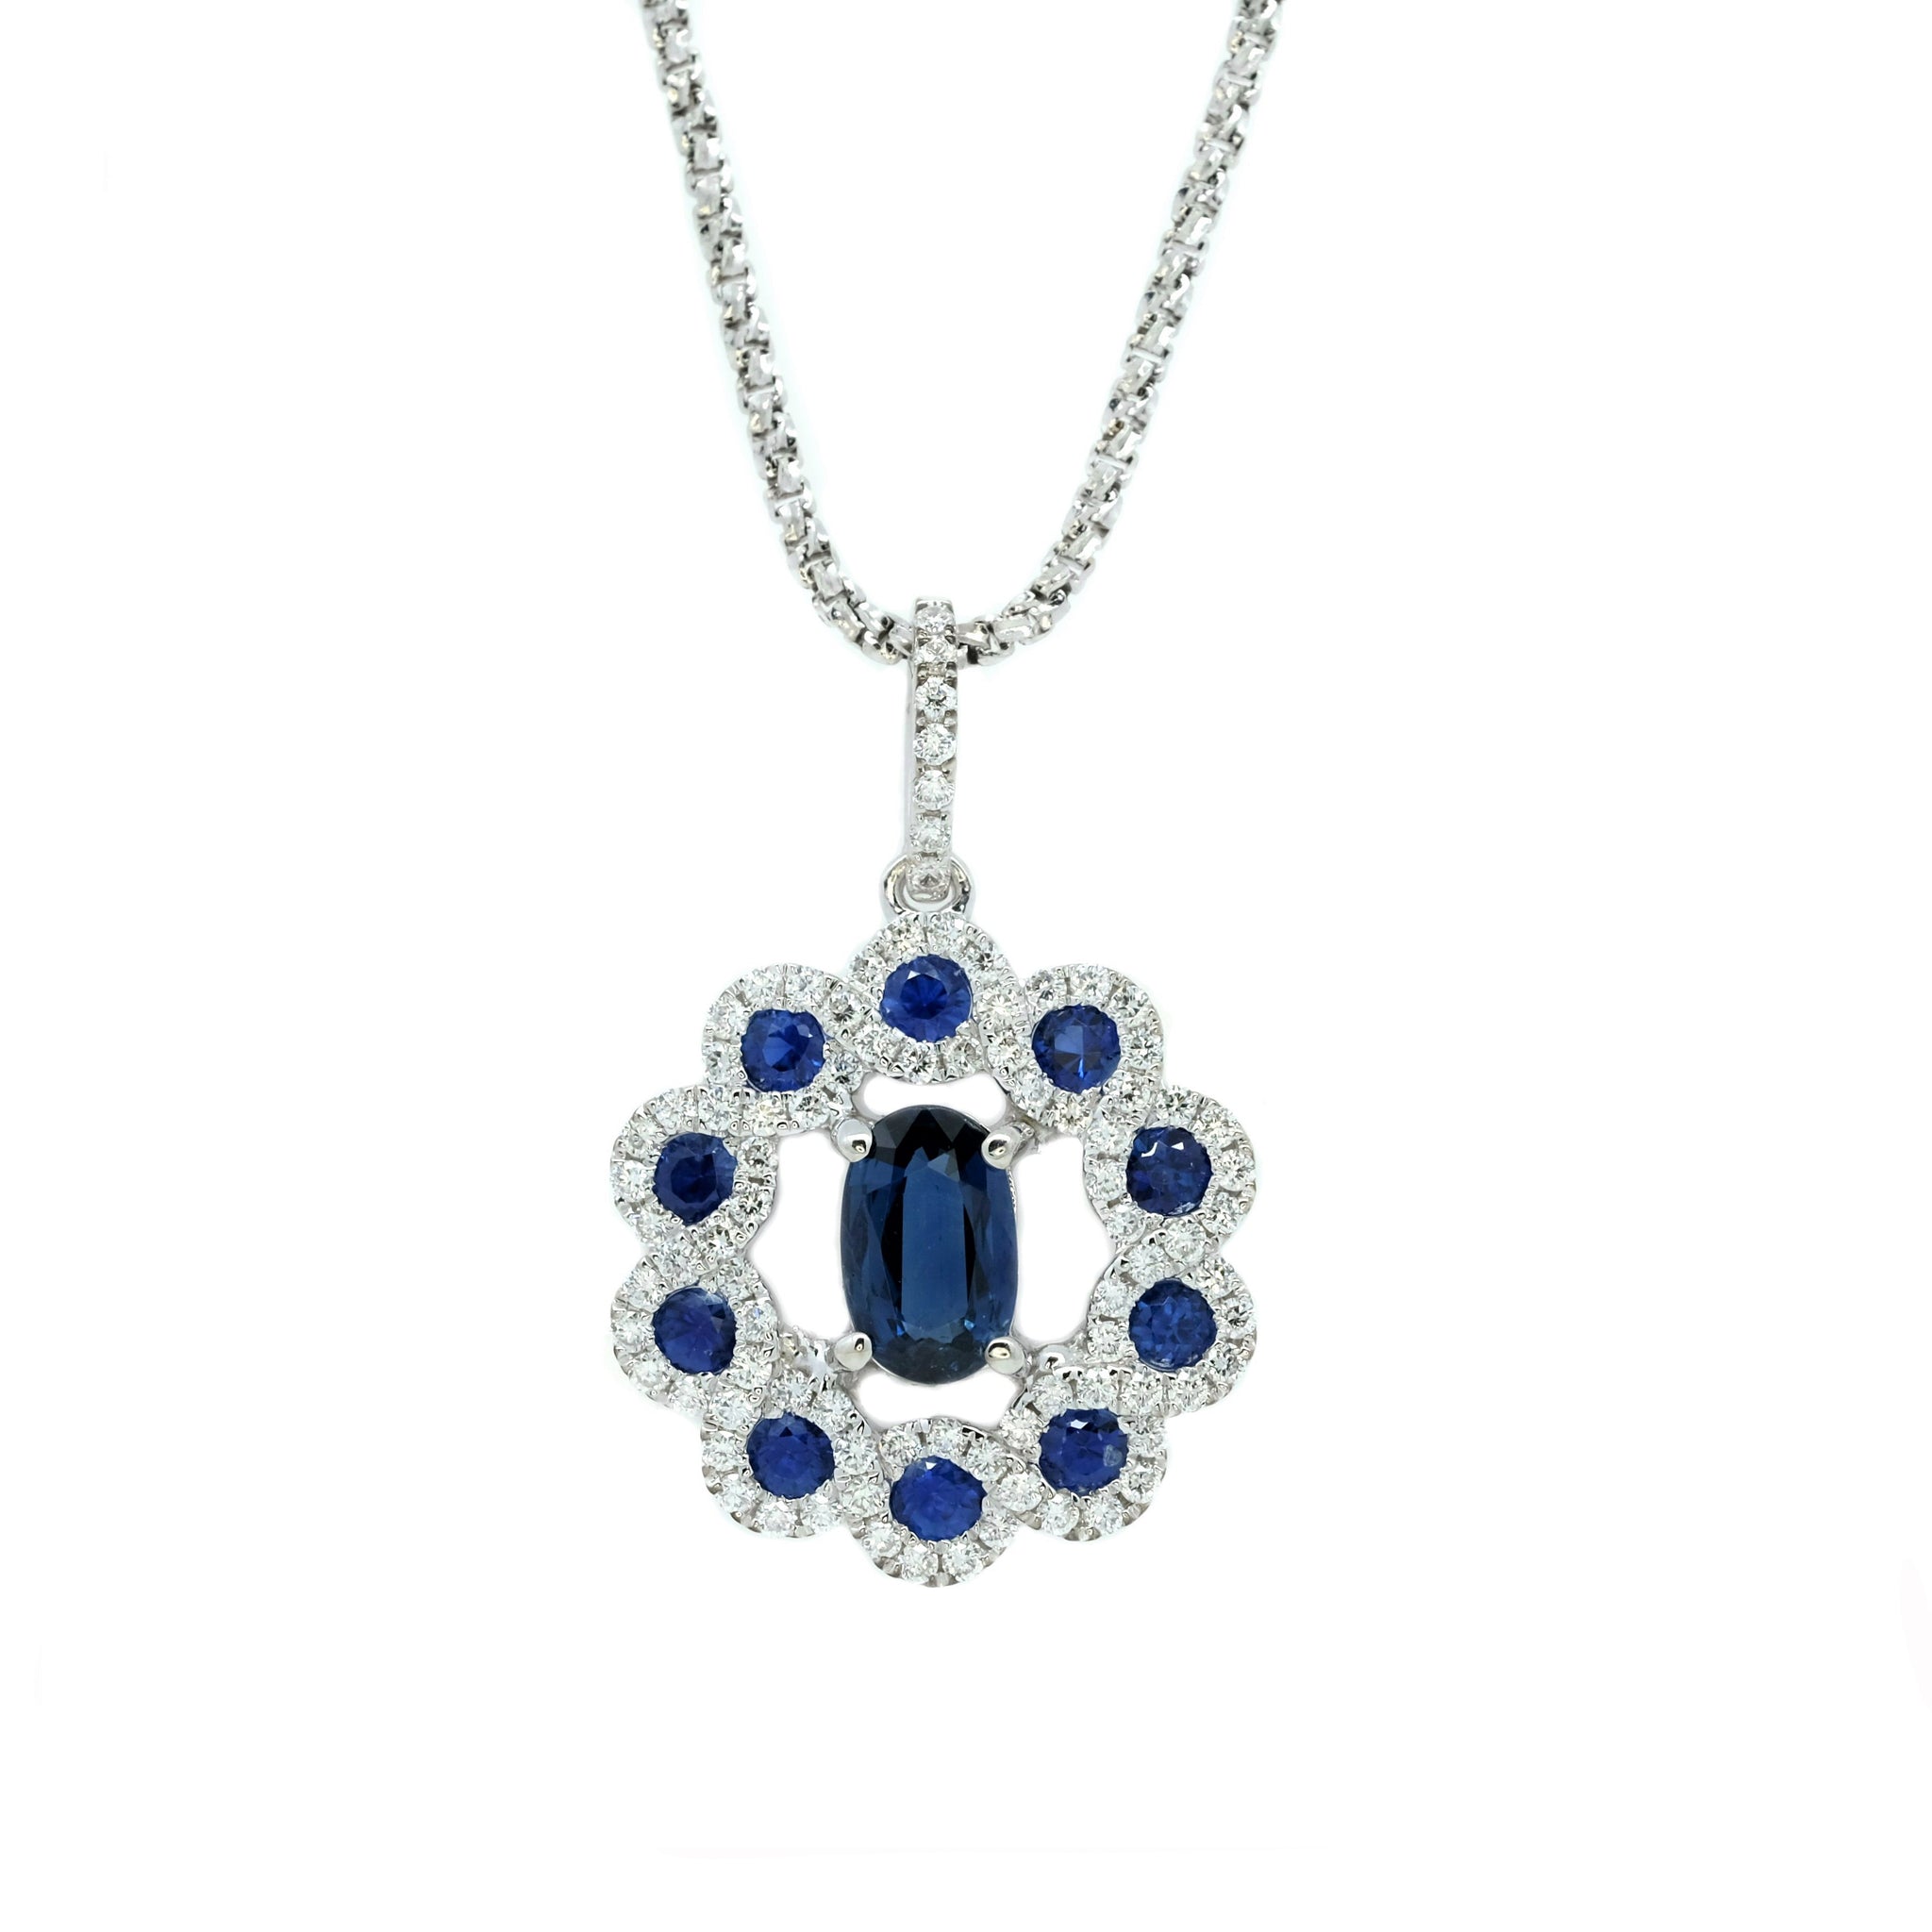 Ombre Blue Sapphire & Diamond Butterfly Pin/ Pendant - Johnny Jewelry